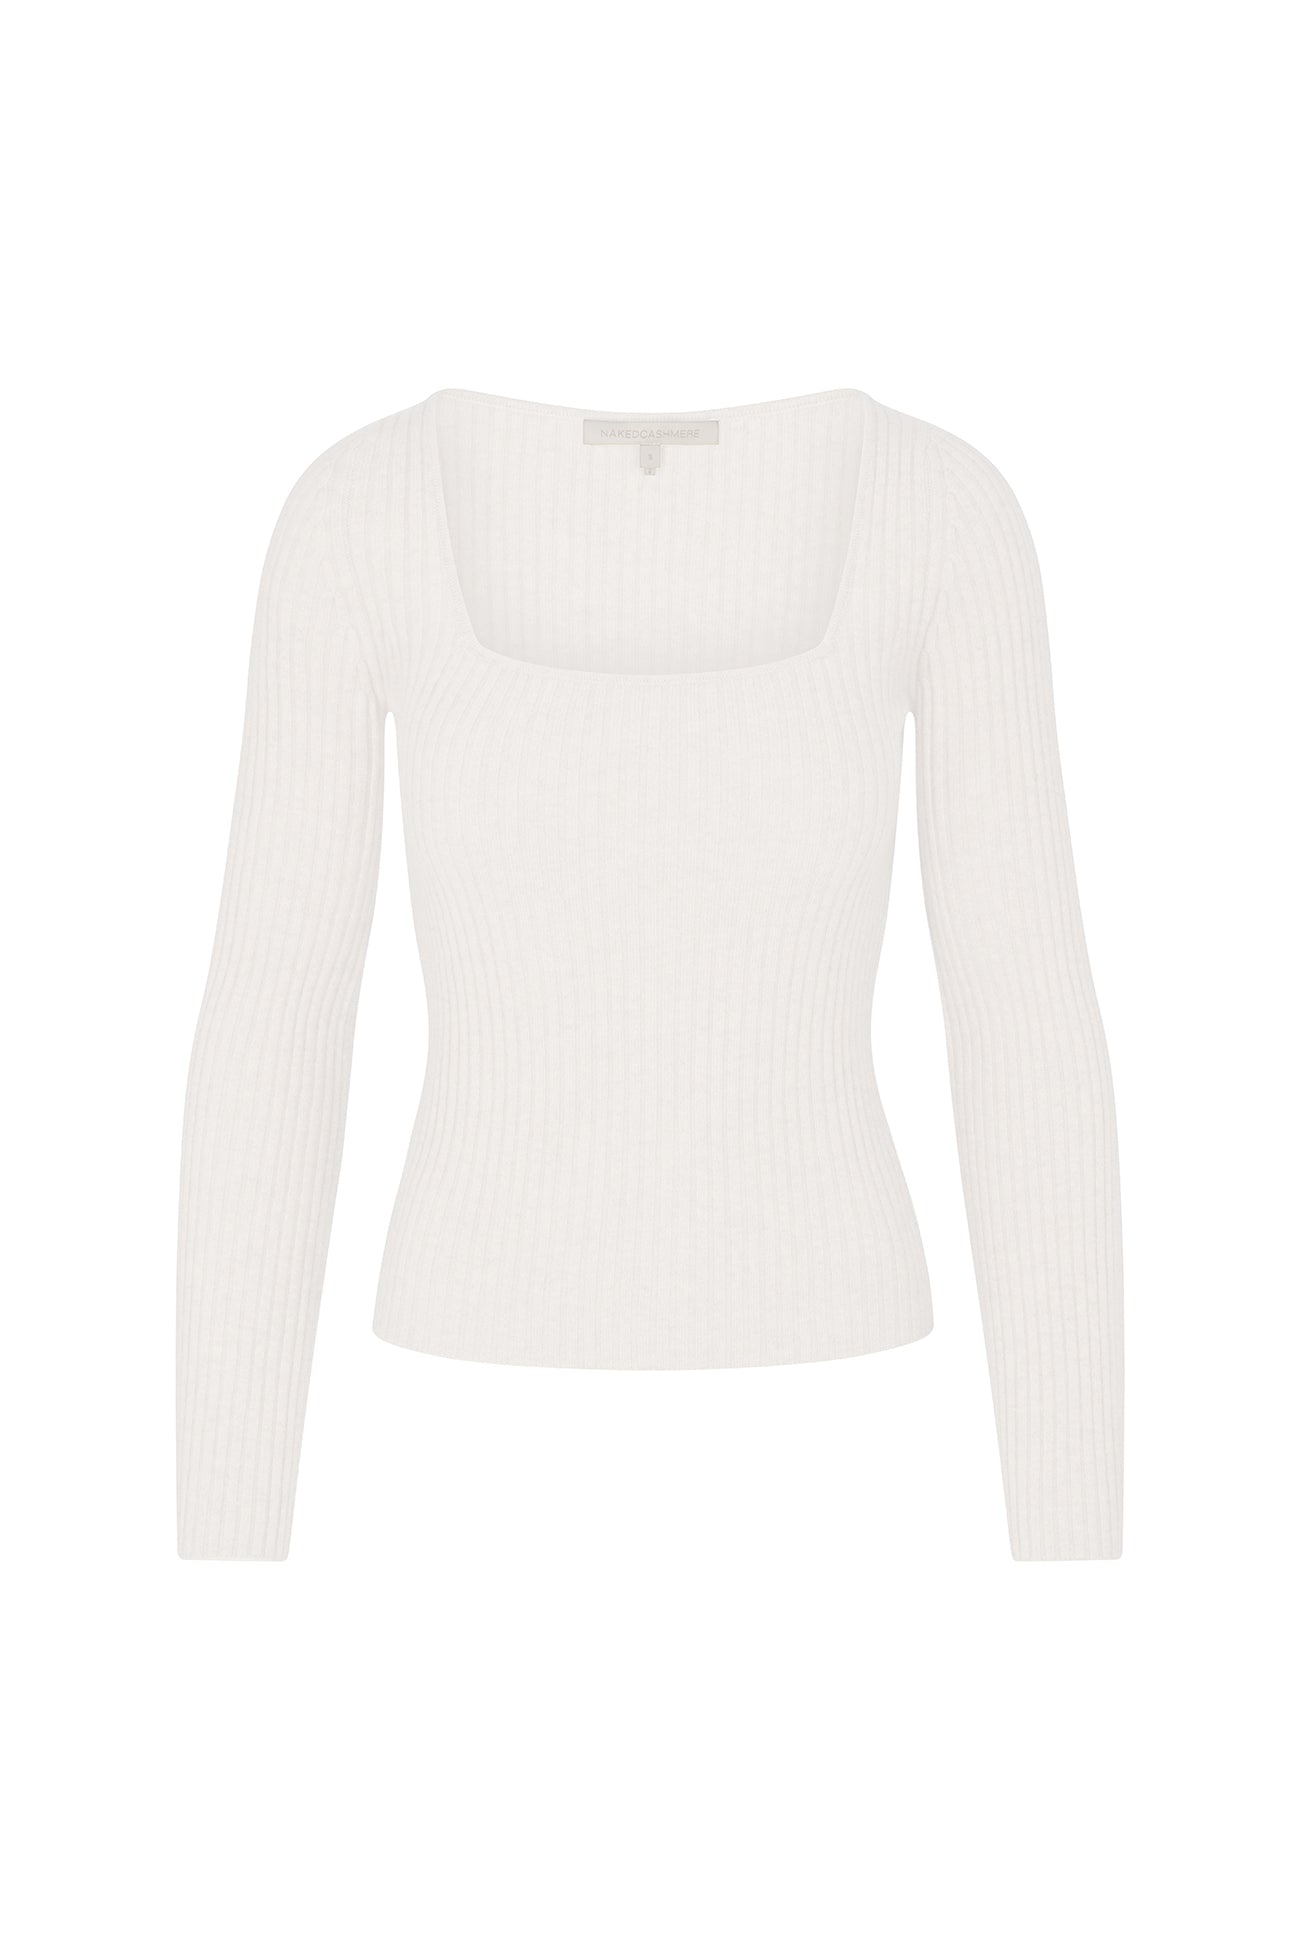 Lillian Long NakedCashmere Sleeve Top Women\'s | Fitted Cashmere